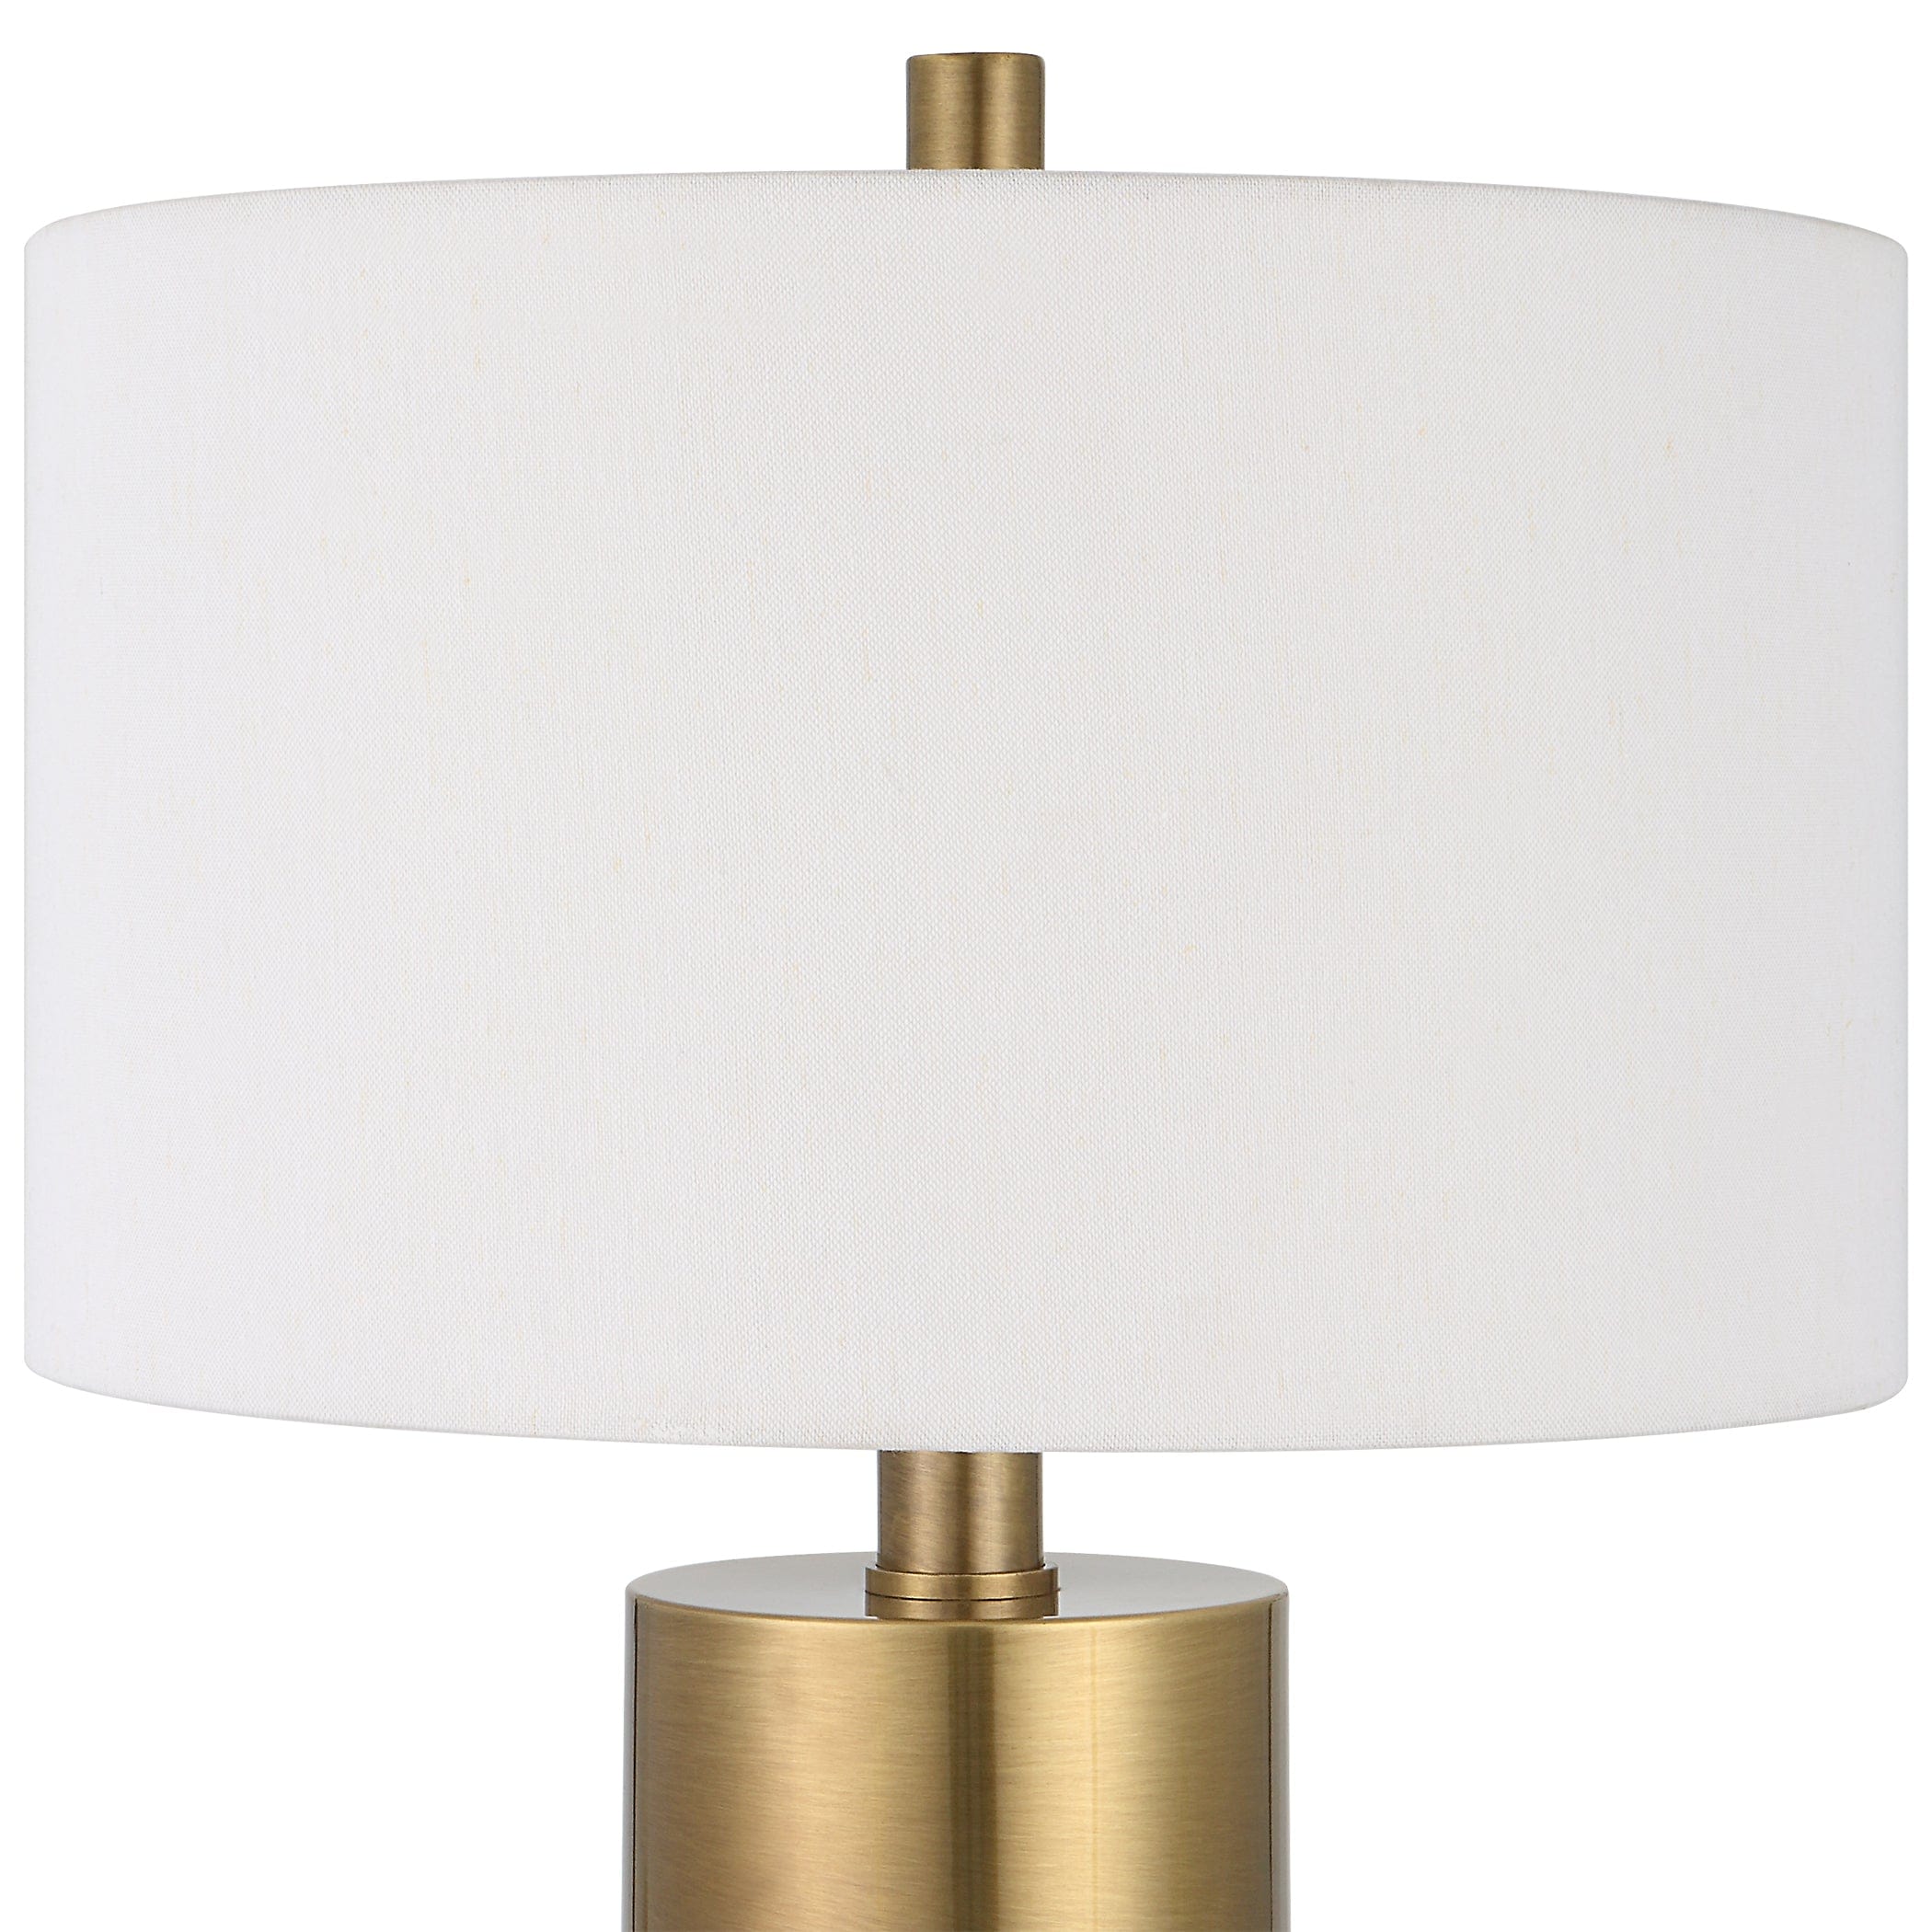 Adelia Ivory & Brass Table Lamp Uttermost